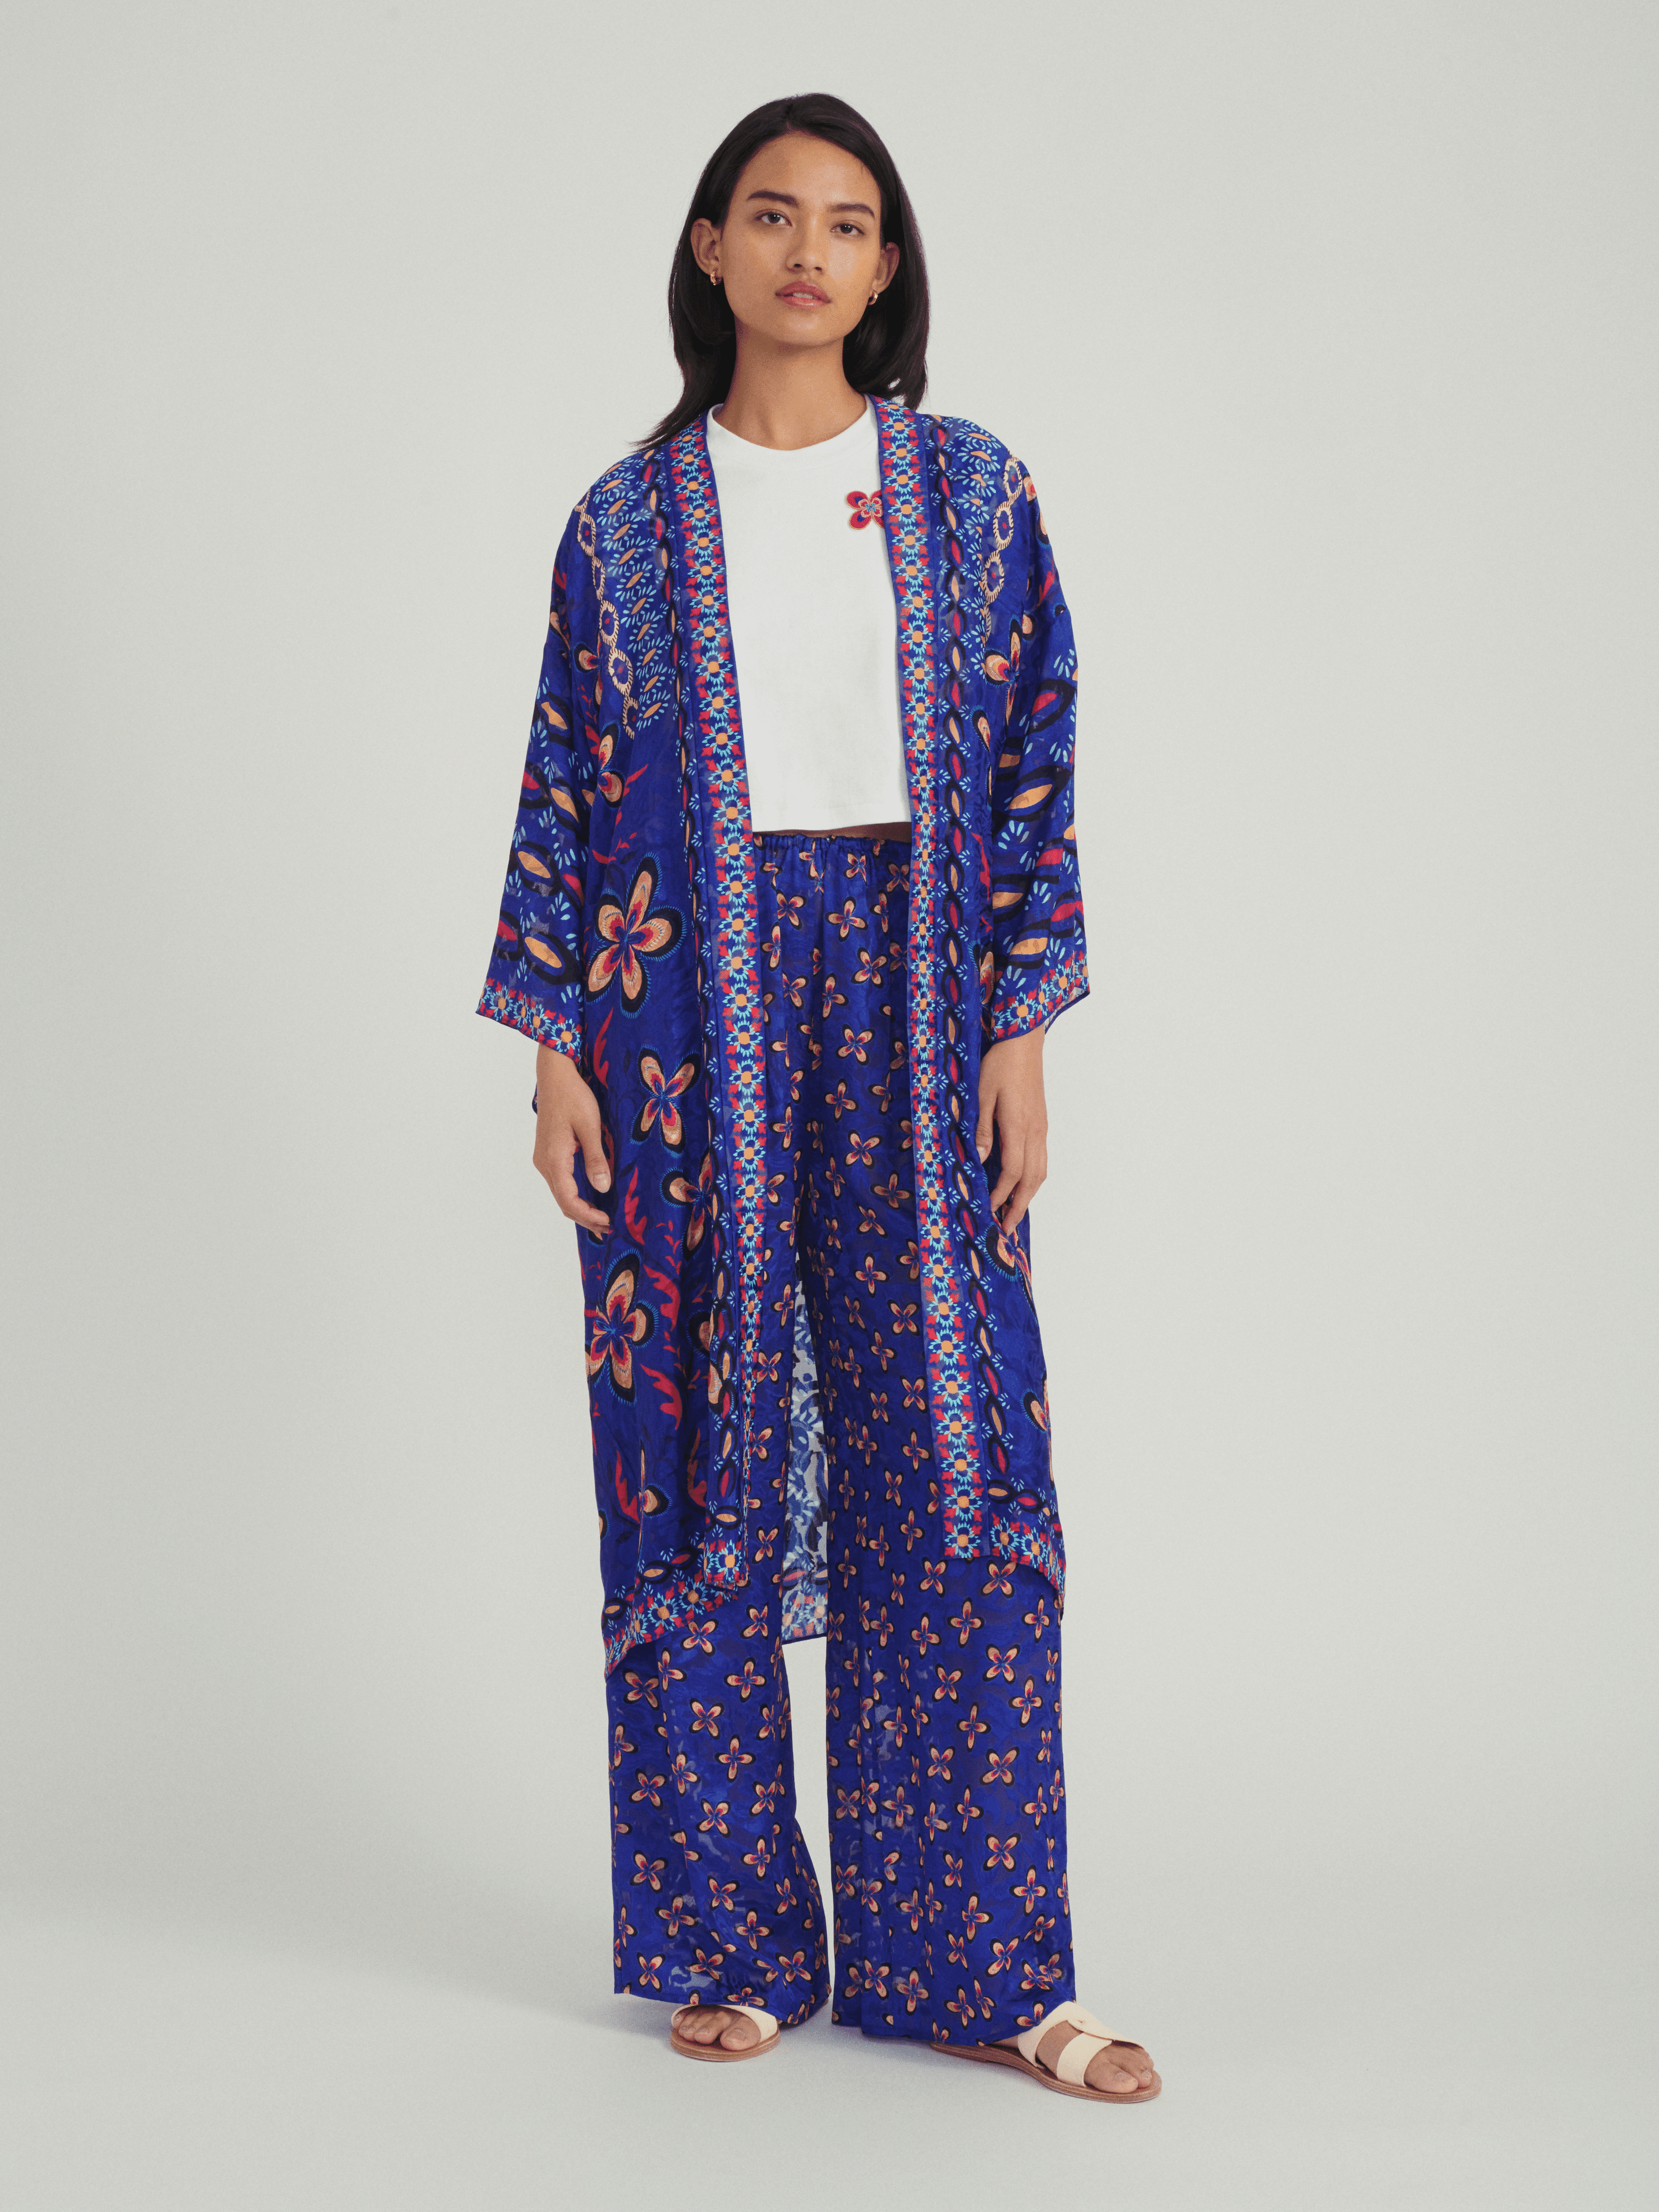 Kai Trousers in Petals Navy